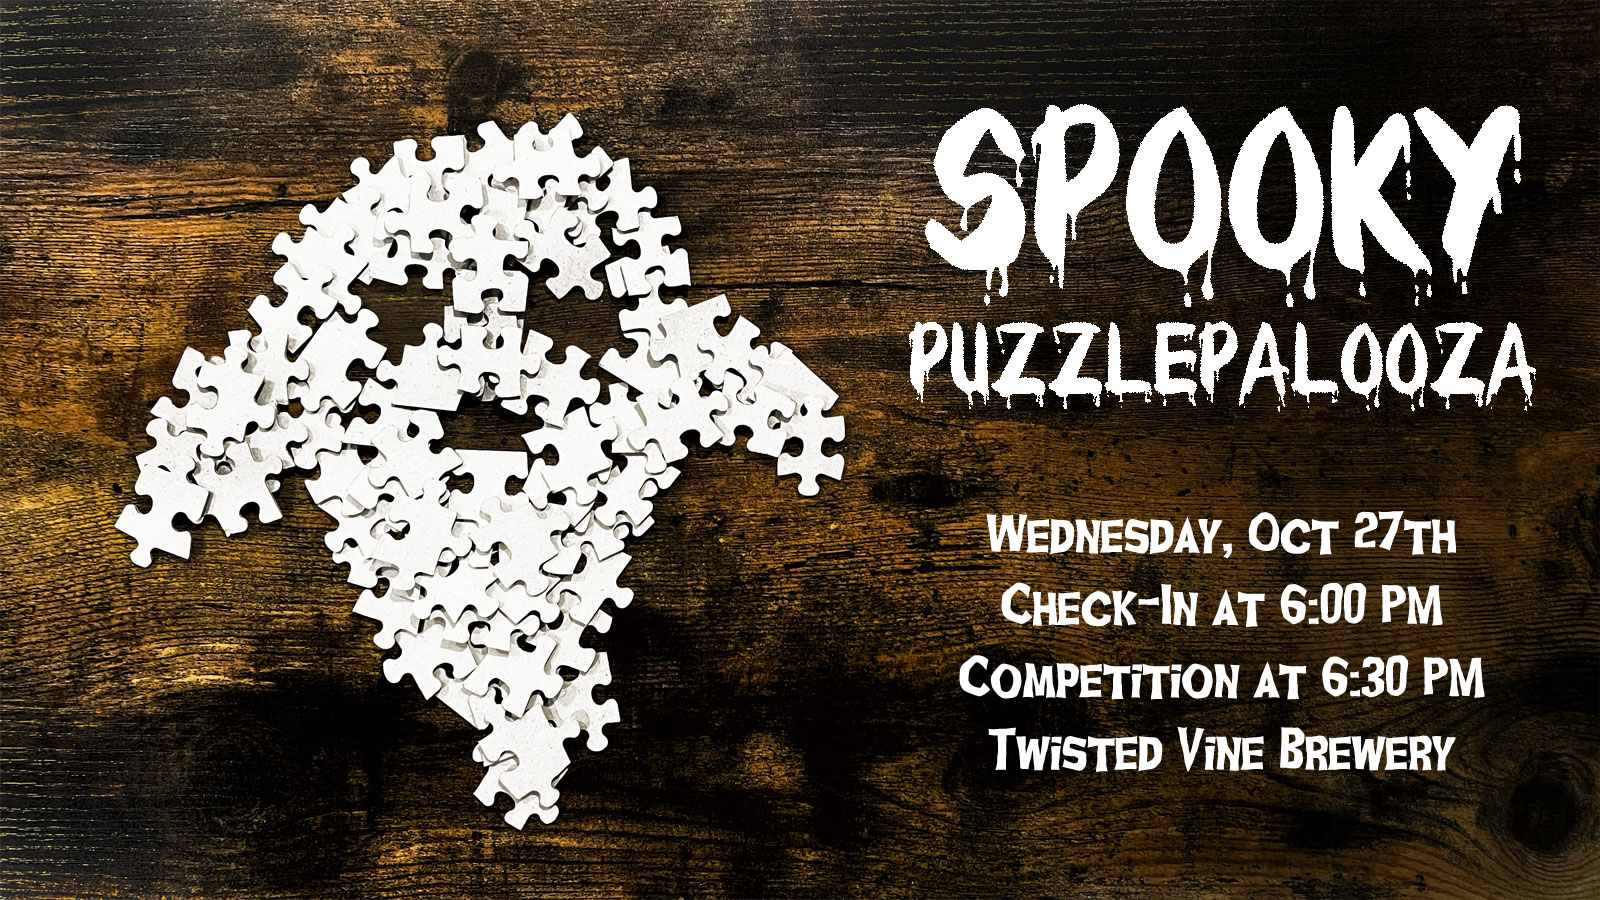 Spooky Puzzlepalooza Jigsaw Puzzle Competition at Twisted Vine Brewery Puzzle Piece Ghost with Event Info